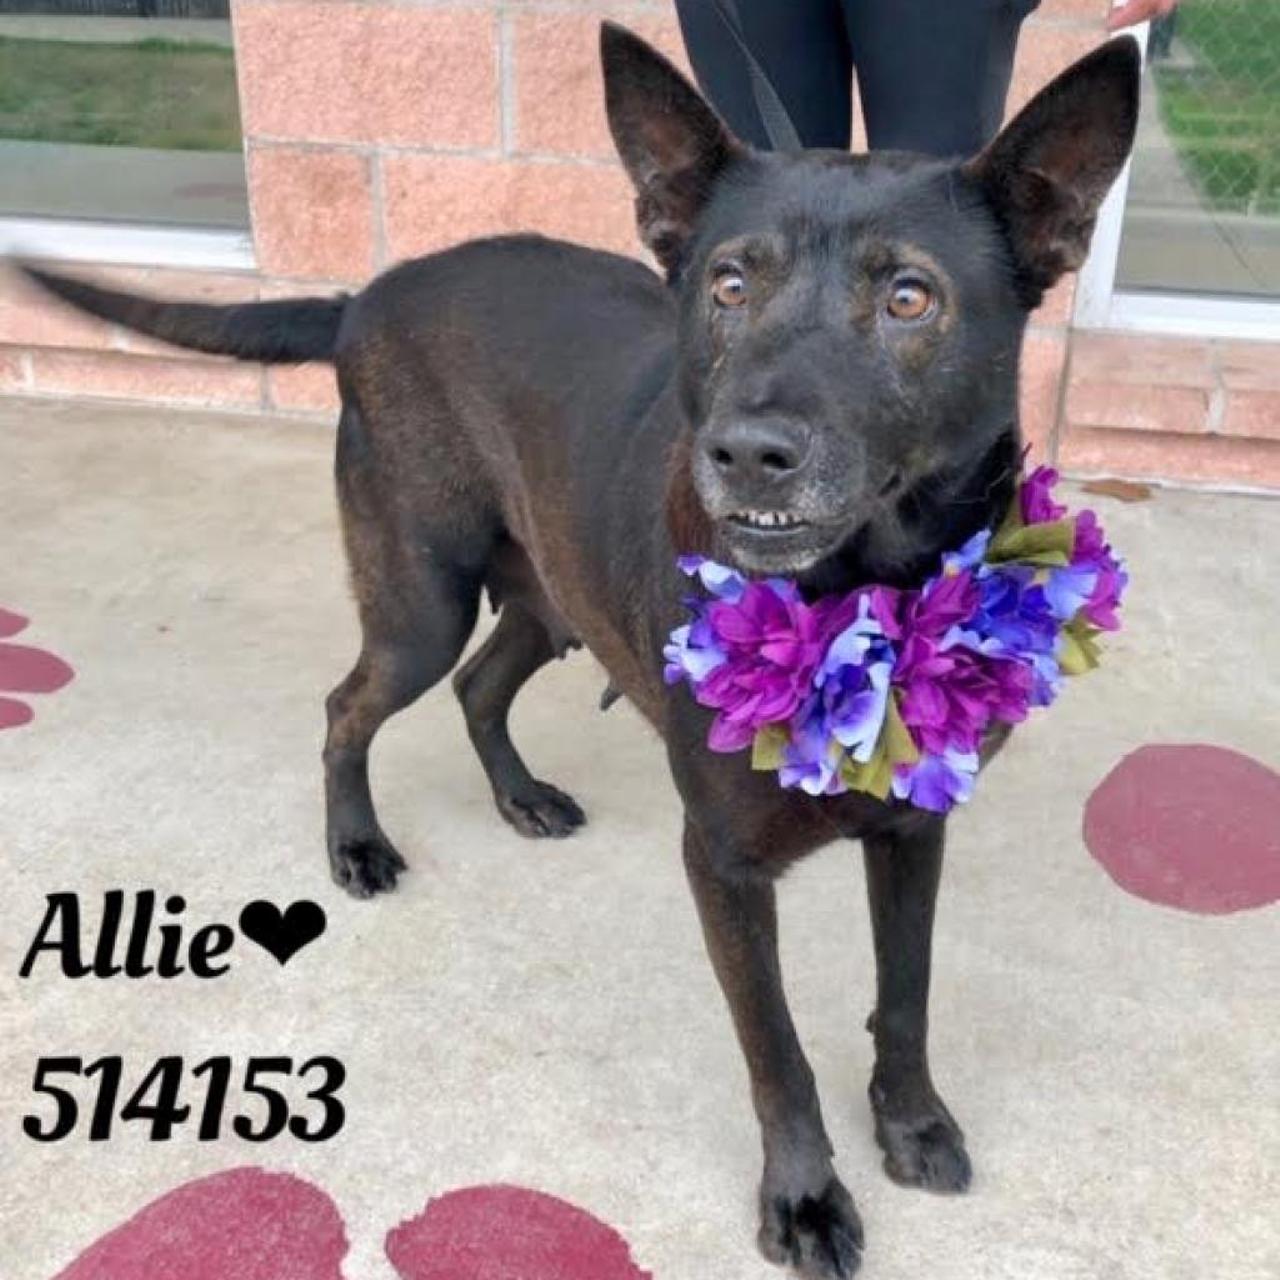 Allie
Allie has a very calm demeandor and is very sweet.  She cant wait to find her forever family to play with. Shepherd mix, 3 years old.